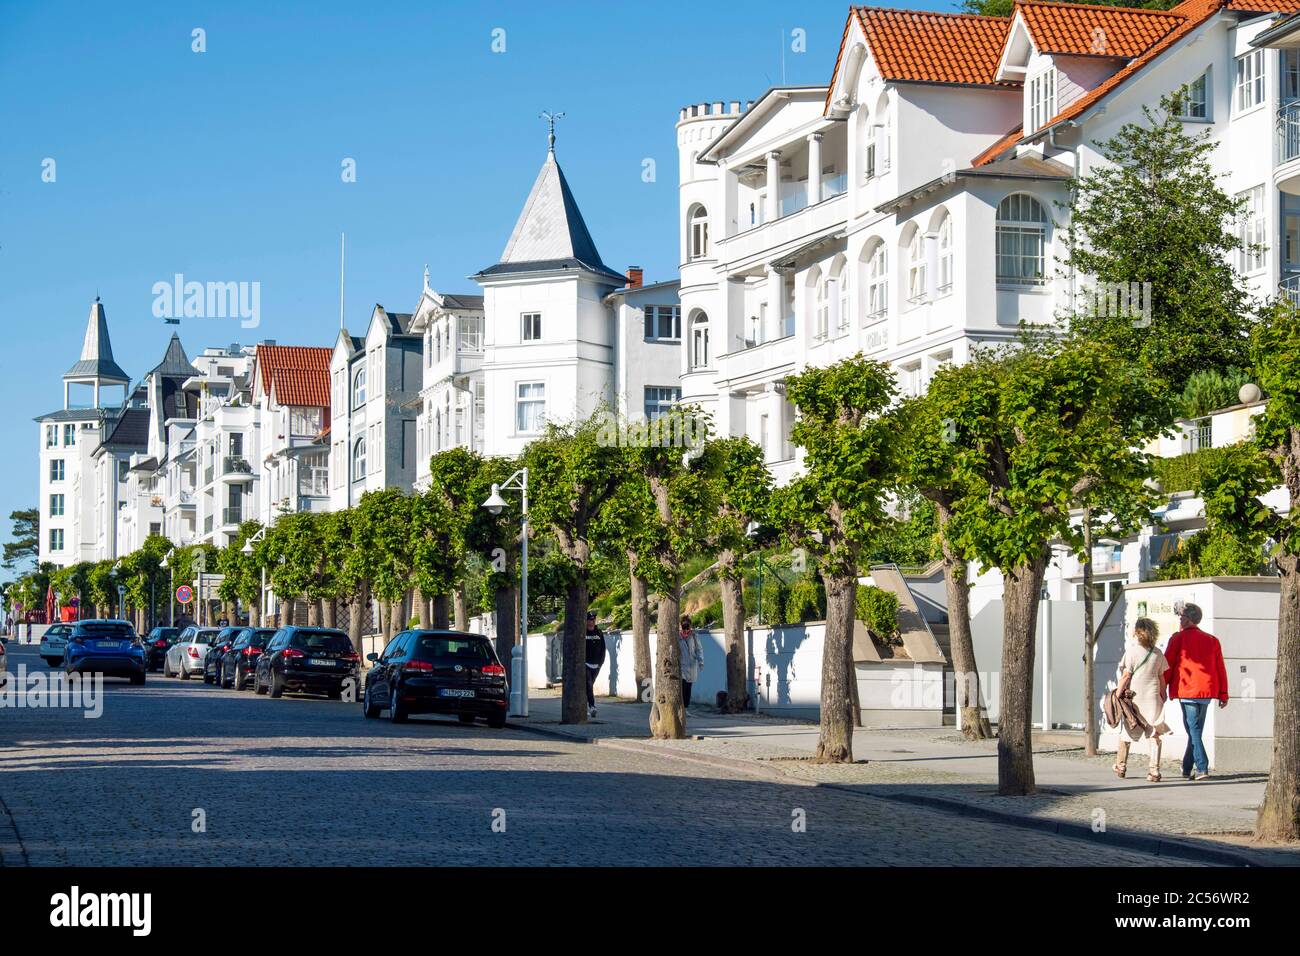 Wilhelmstraße in the famous city of Sellin, Germany Stock Photo